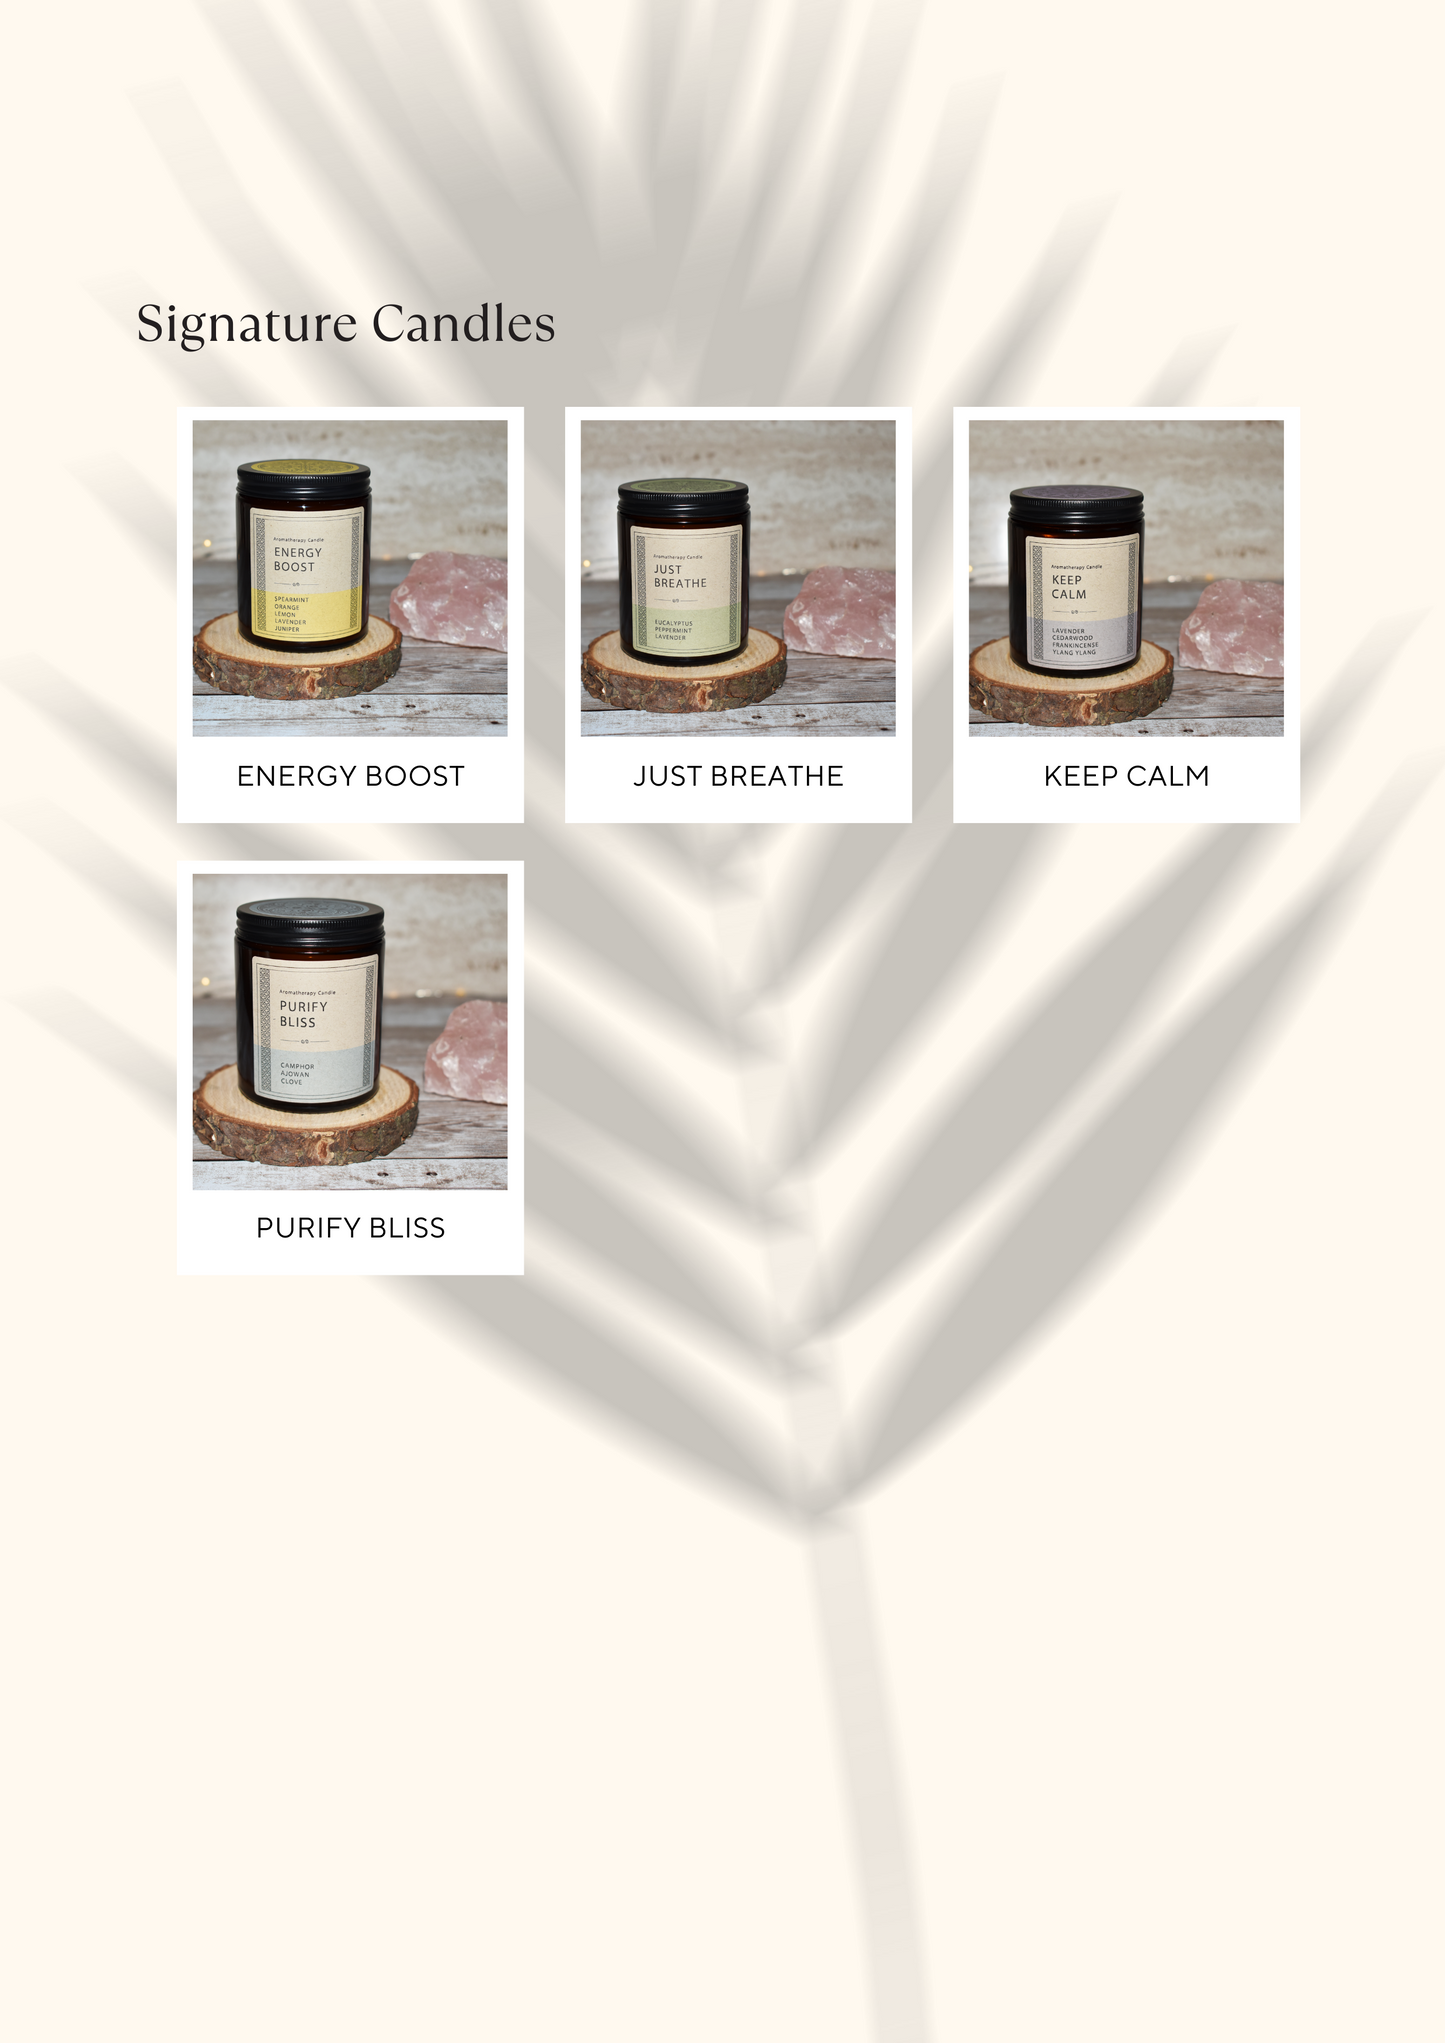 Econua "Creme de la Creme" - Baileys Cream Liqueur, Aromatherapy Candle in our Zodiac Scent or Signature Fragrance | Olives | Chocolate Bars | Nuts | Personalised Seed Paper Card